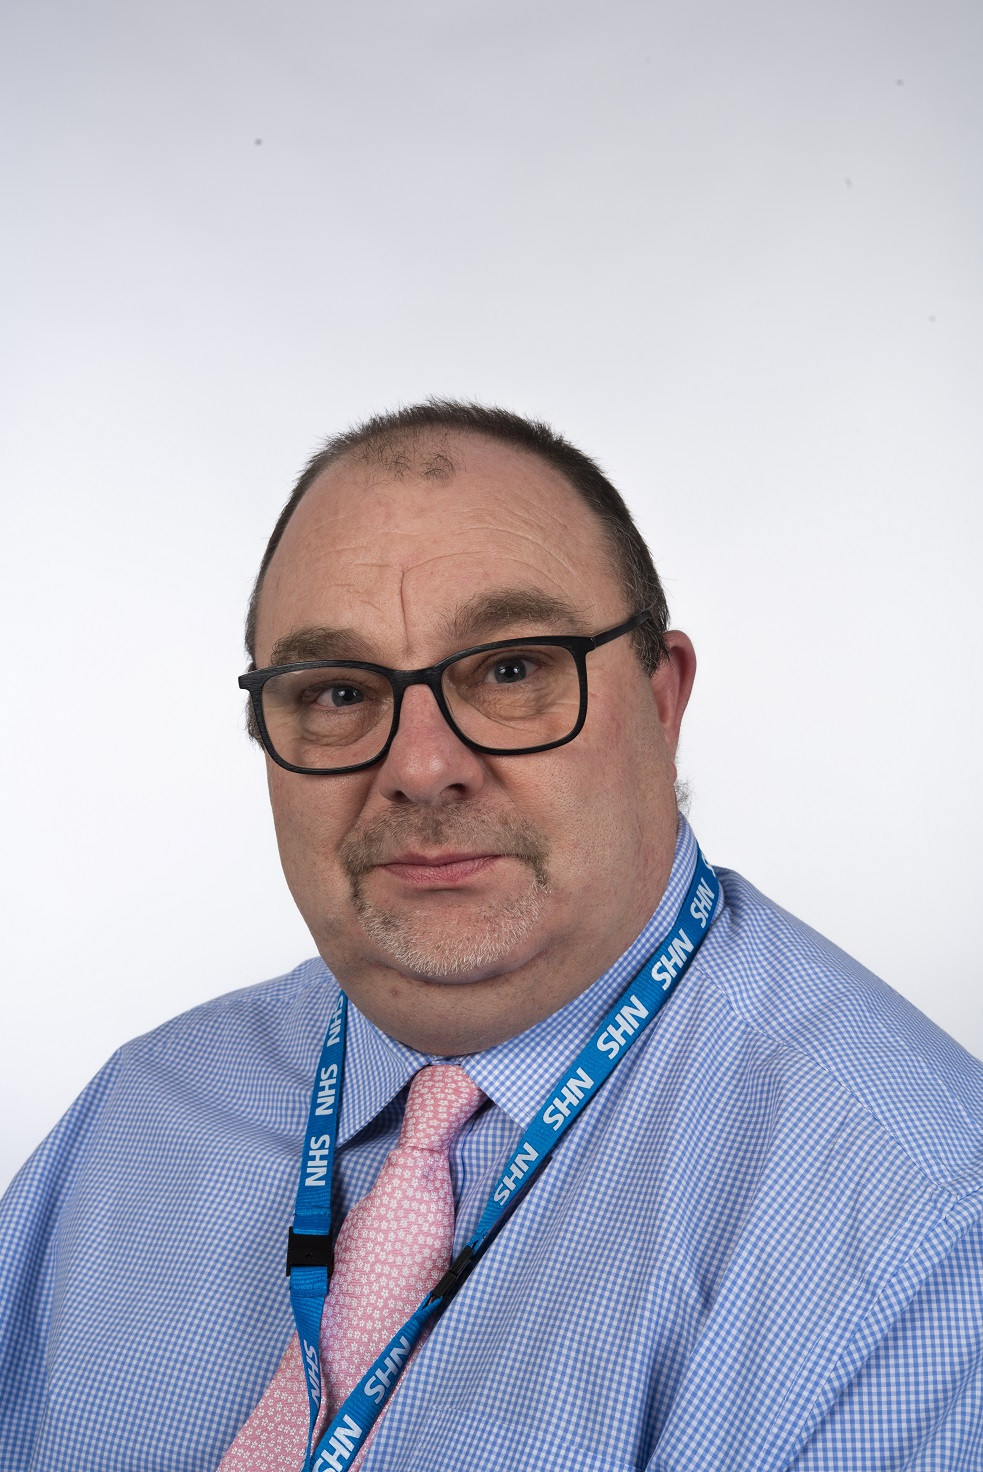 Carl Plummer, Trust Governor who has been appointed to a national role. Head and shoulders image, he is wearing a blue shirt pink tie and NHS lanyard